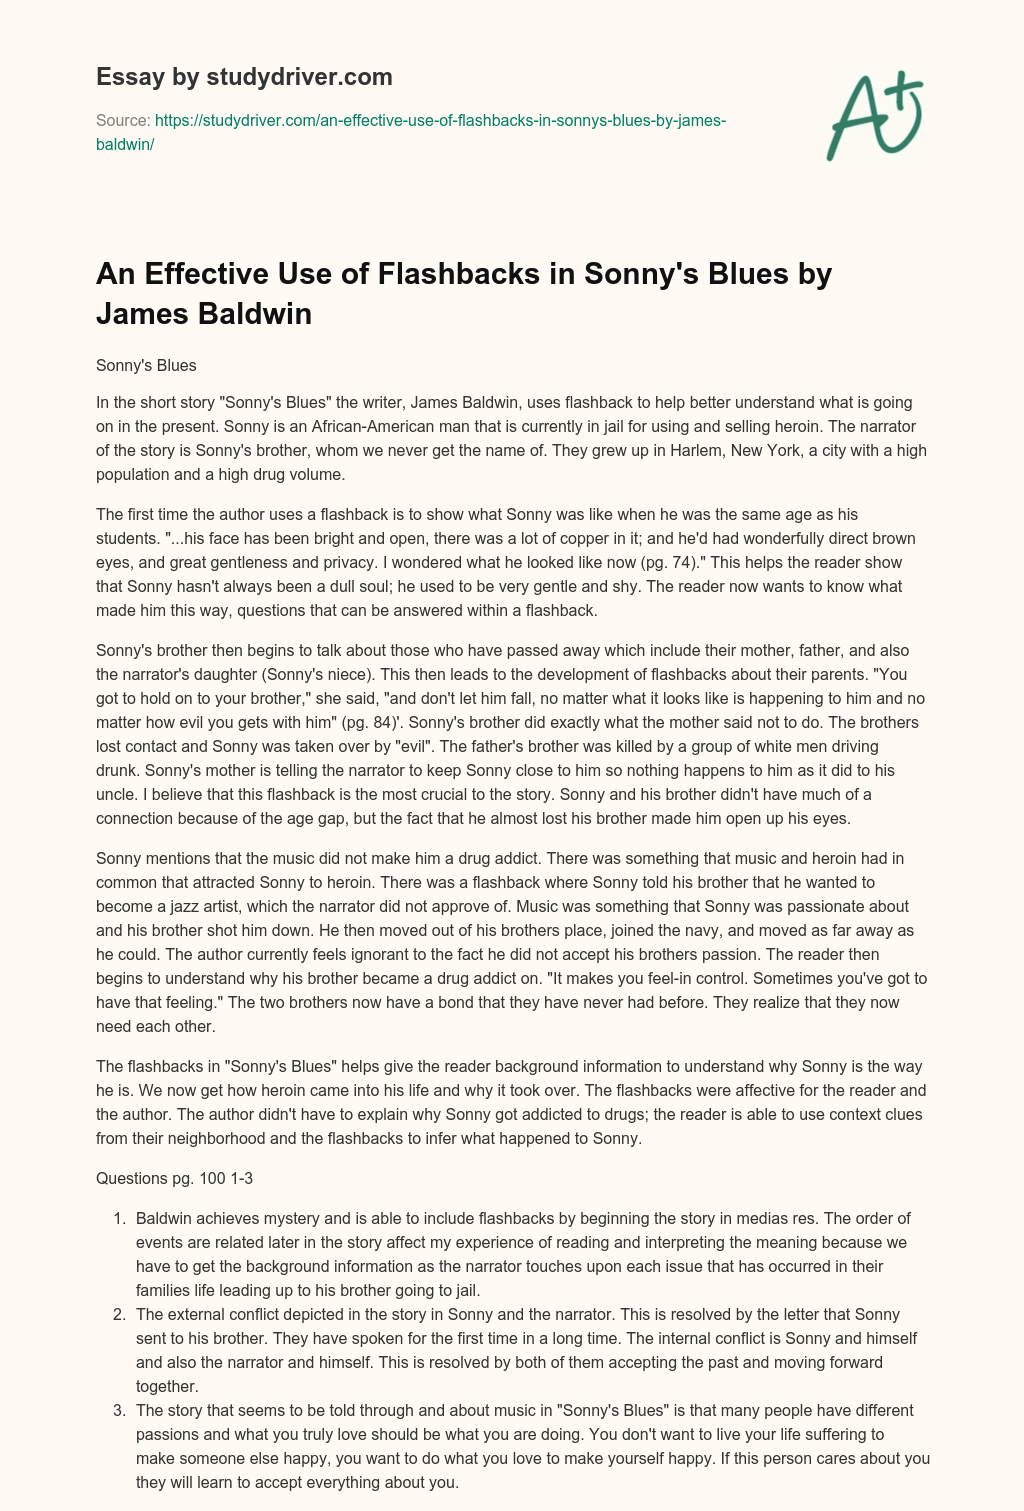 An Effective Use of Flashbacks in Sonny’s Blues by James Baldwin essay